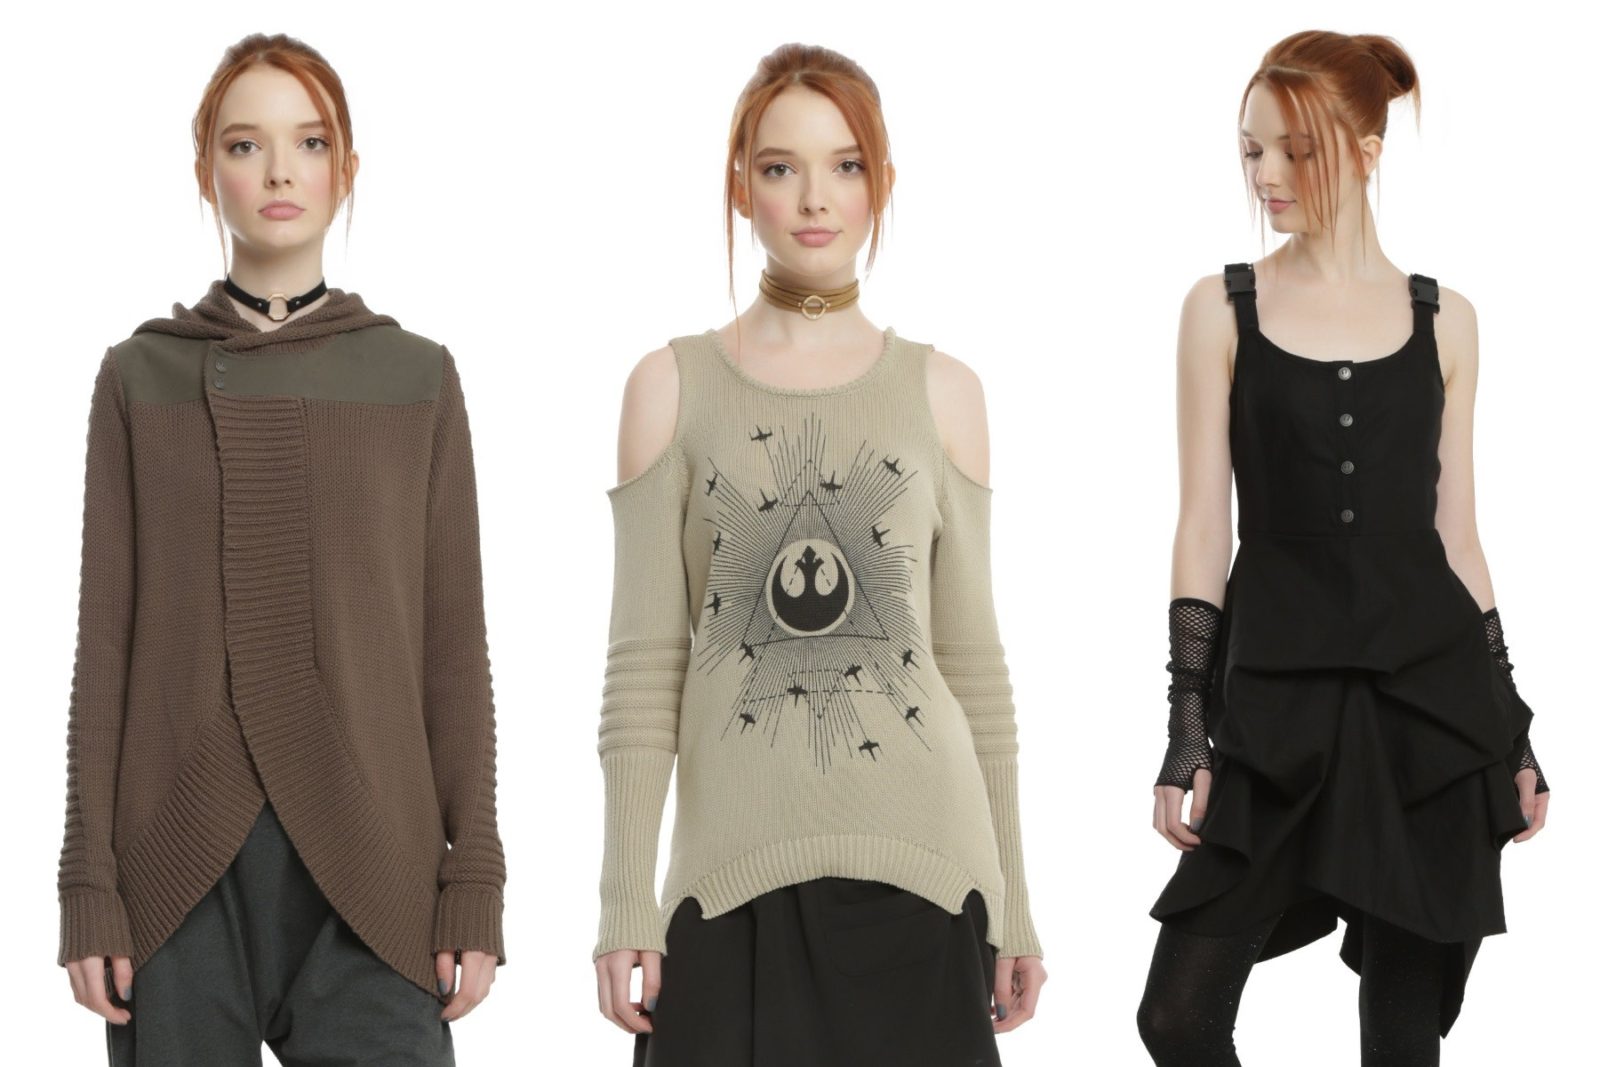 New Rogue One fashion collection available at Hot Topic